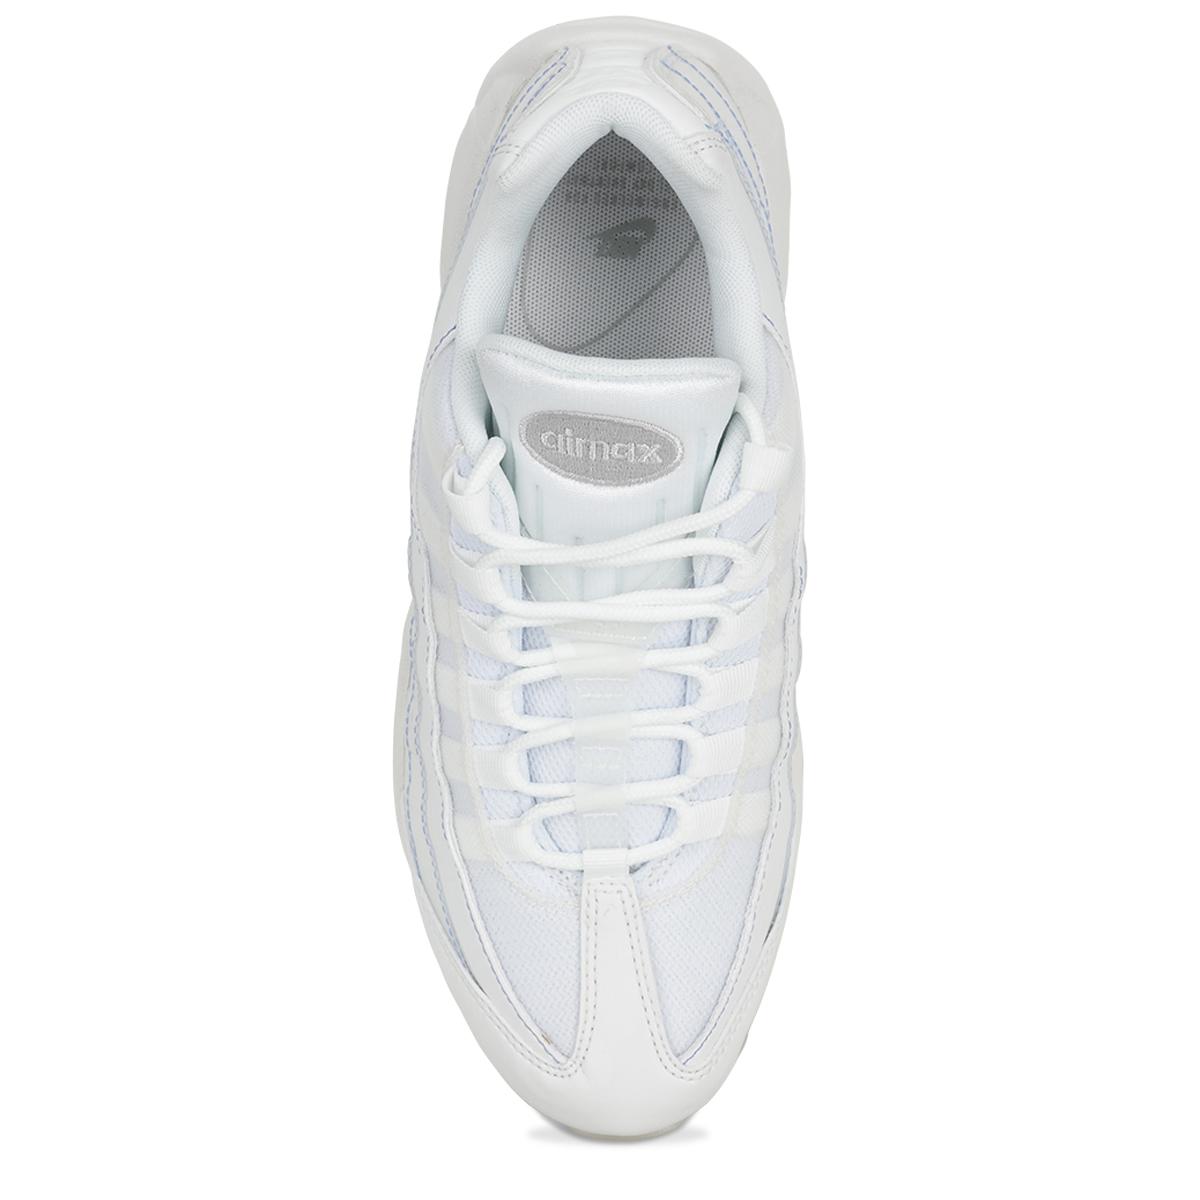 Nike Leather Air Max White Sneaker - Lyst